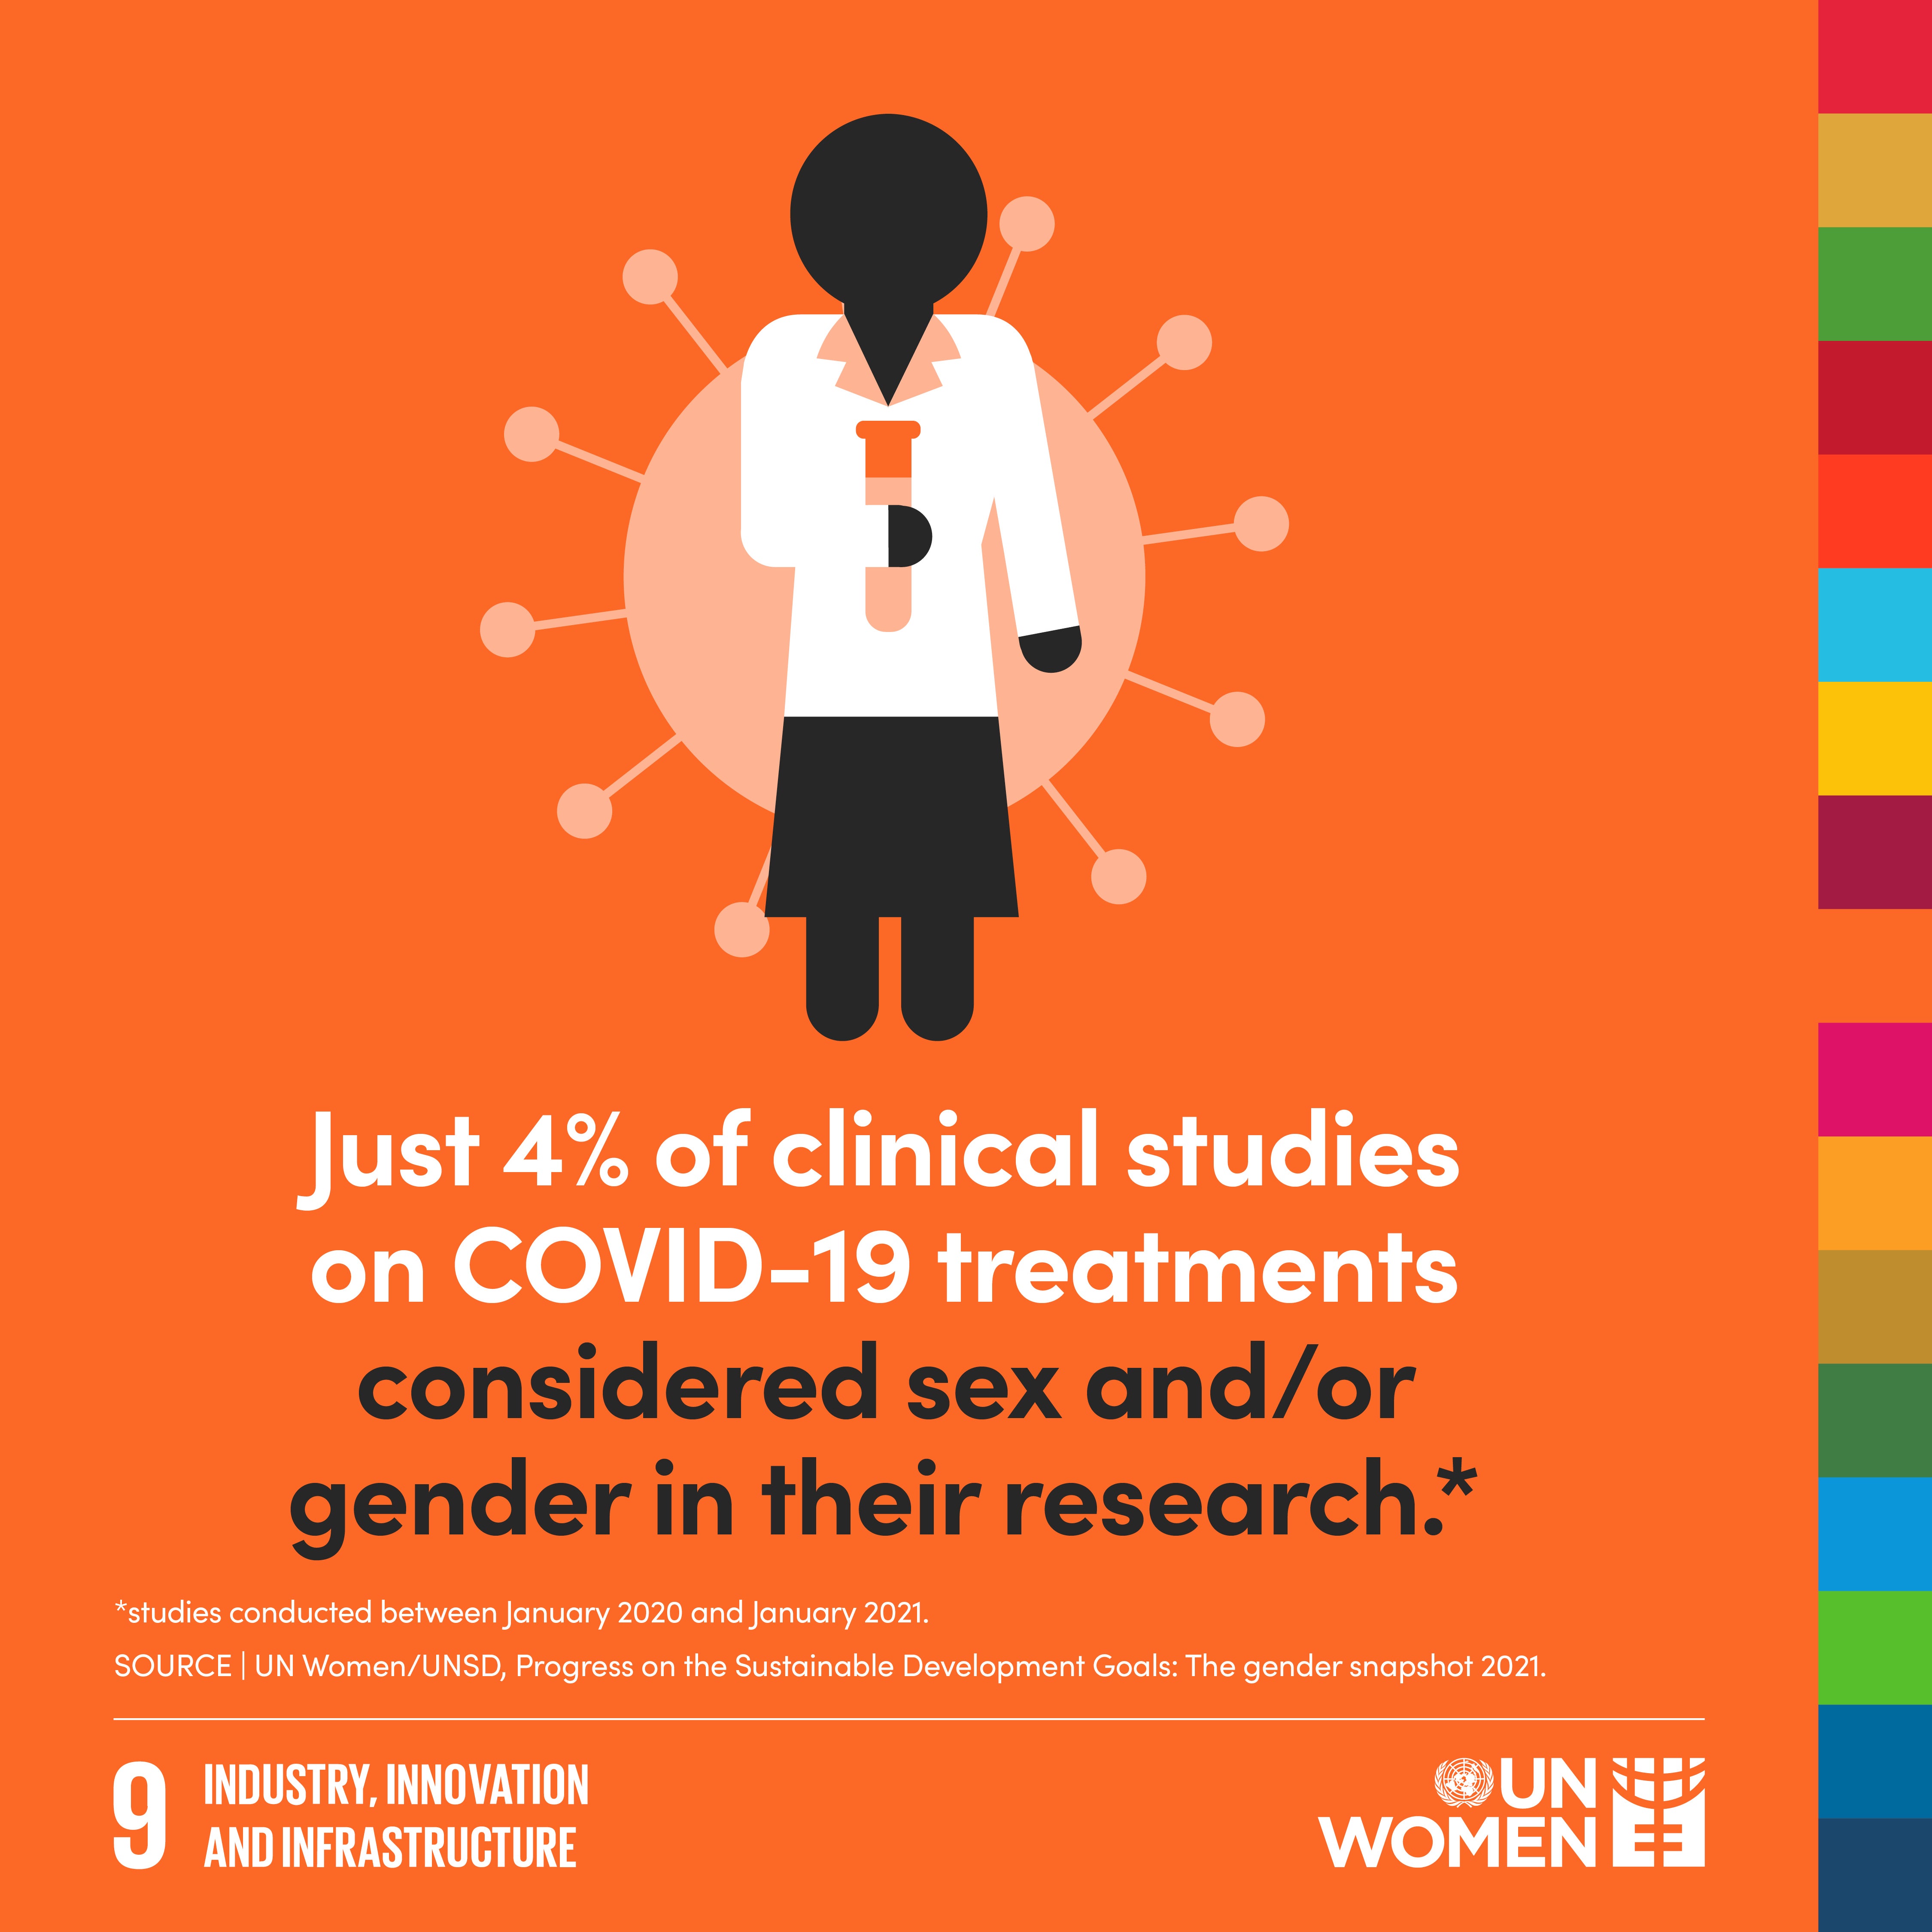 Just 4% of clinical studies on COVID-19 treatments considered sex and/or gender in their research